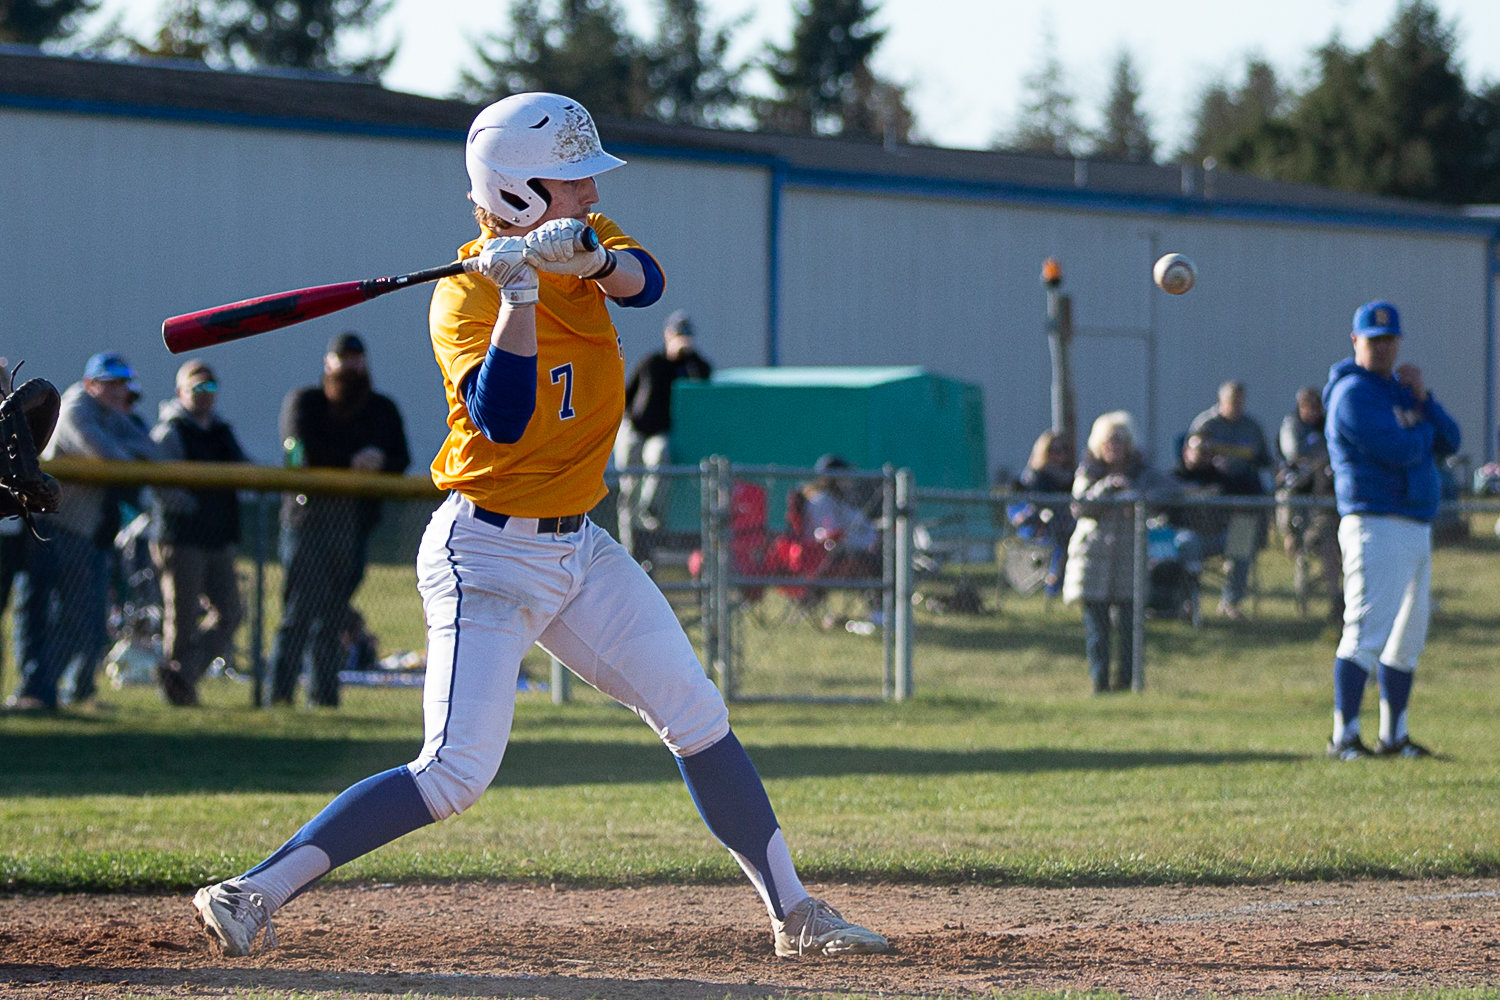 Rochester's Braden Hartley takes a swing at a pitch against W.F. West at Heinz-Rotter Field March 21.